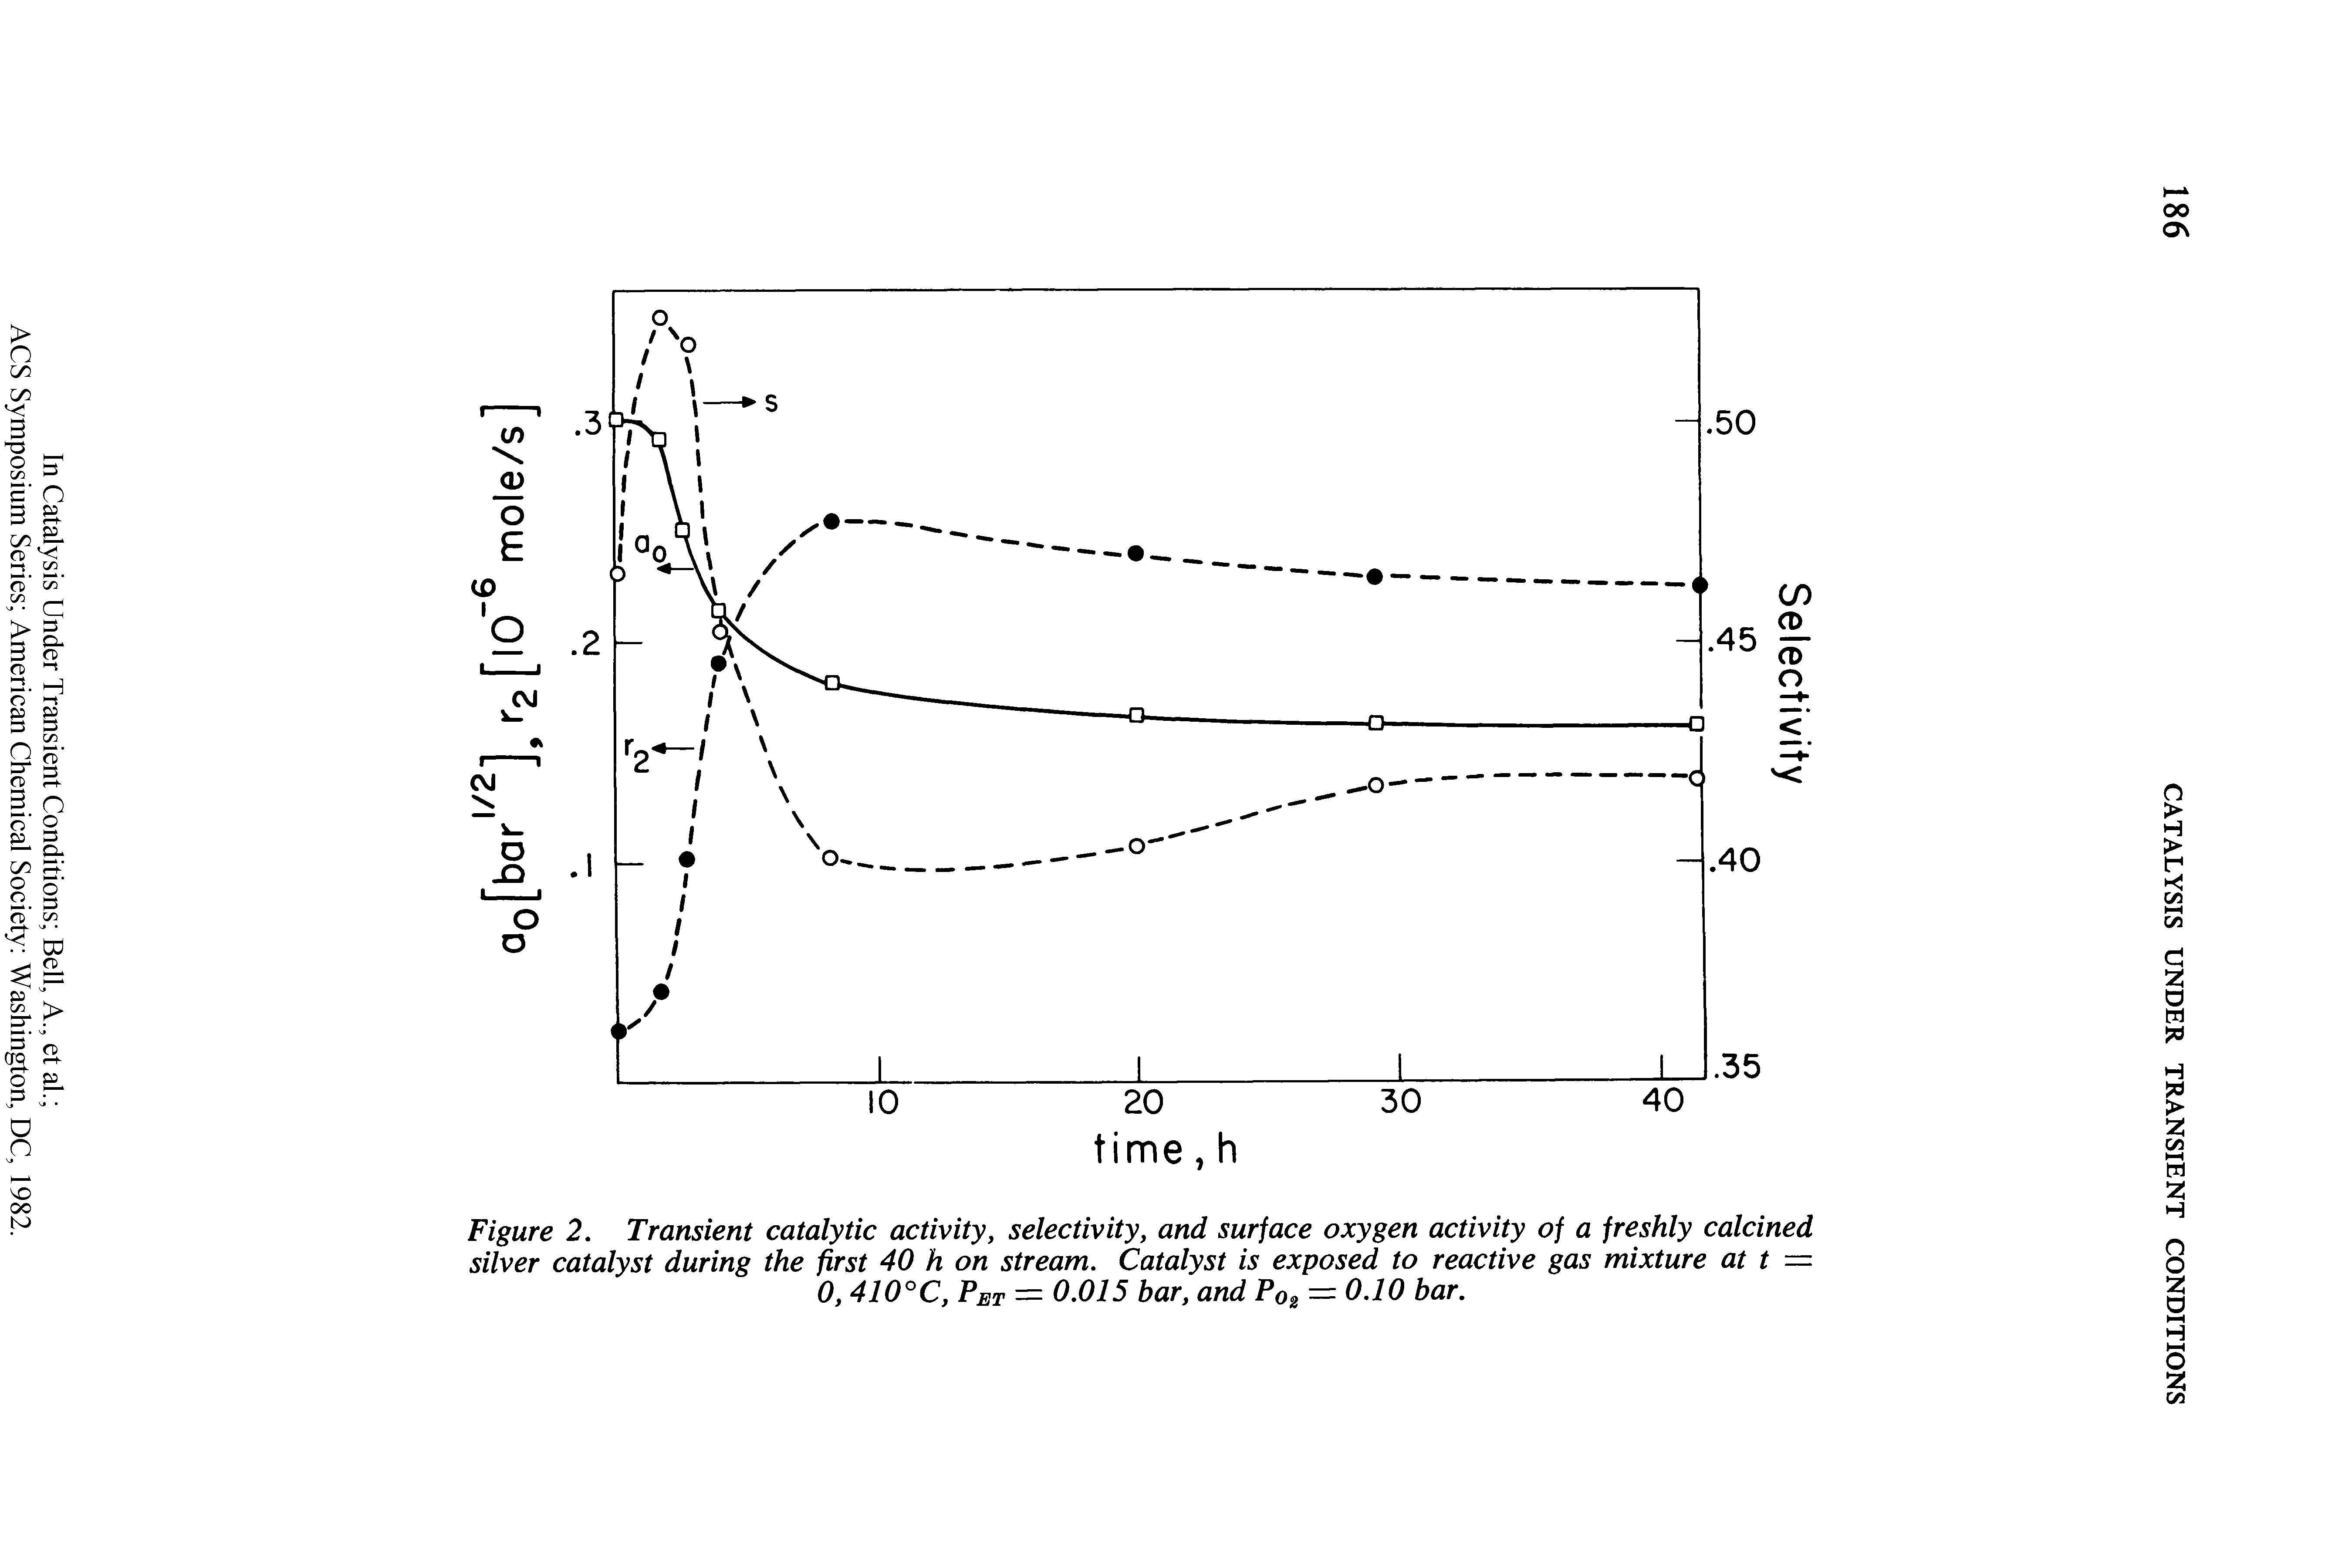 Figure 2. Transient catalytic activity, selectivity, and surface oxygen activity of a freshly calcined silver catalyst during the first 40 h on stream. Catalyst is exposed to reactive gas mixture at t — 0, 410°C, Pet — 0.015 bar, and Po2 = 0.i0 for.